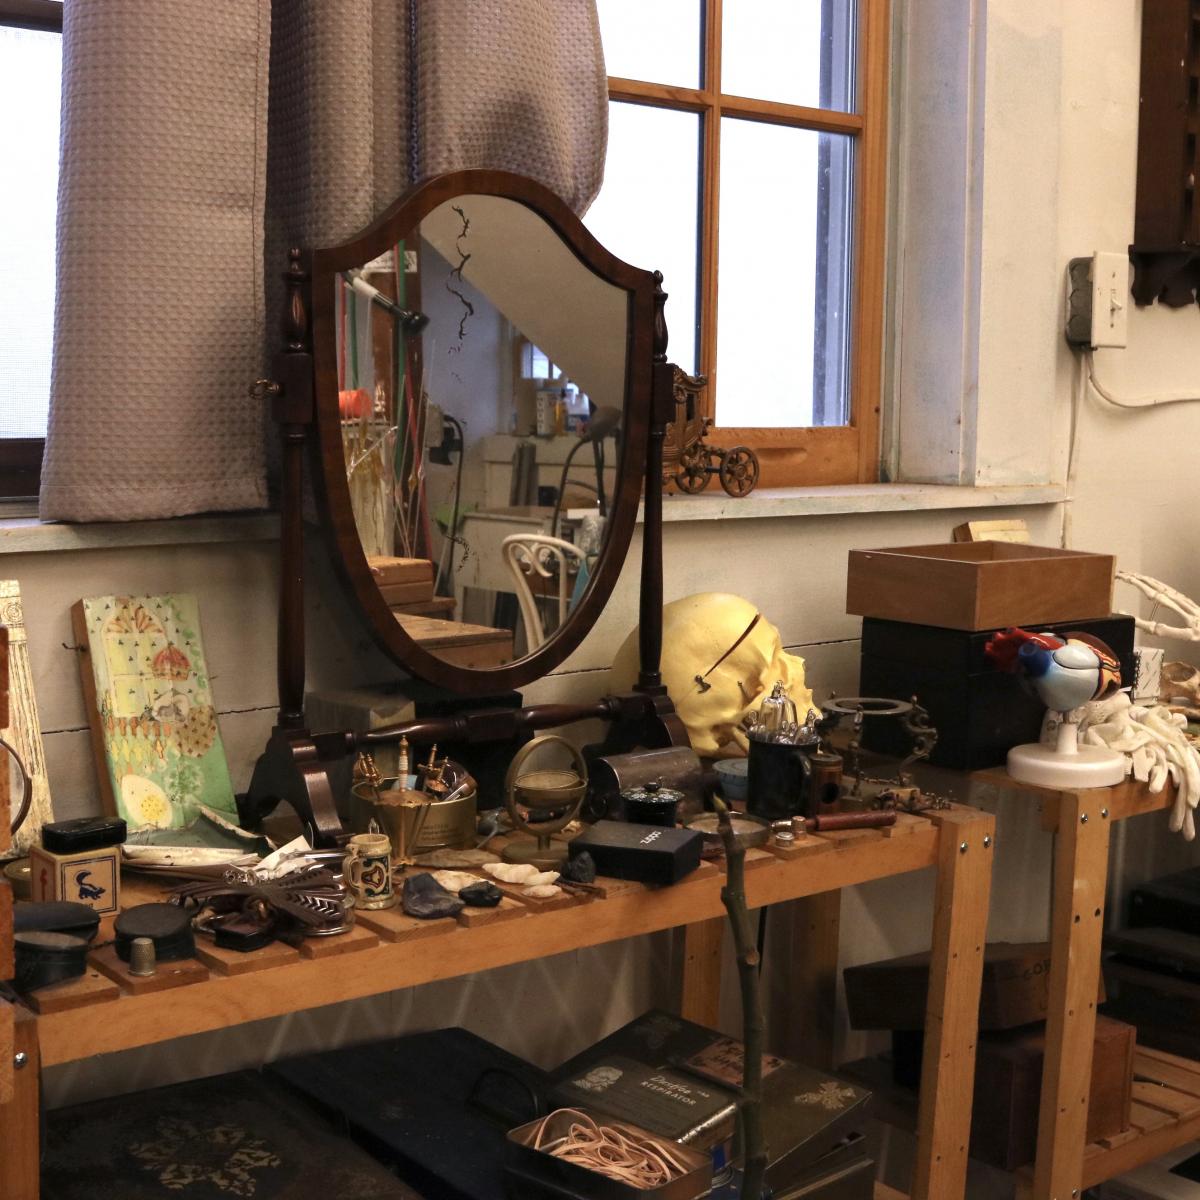 A mirror and objects the artist finds inspiring